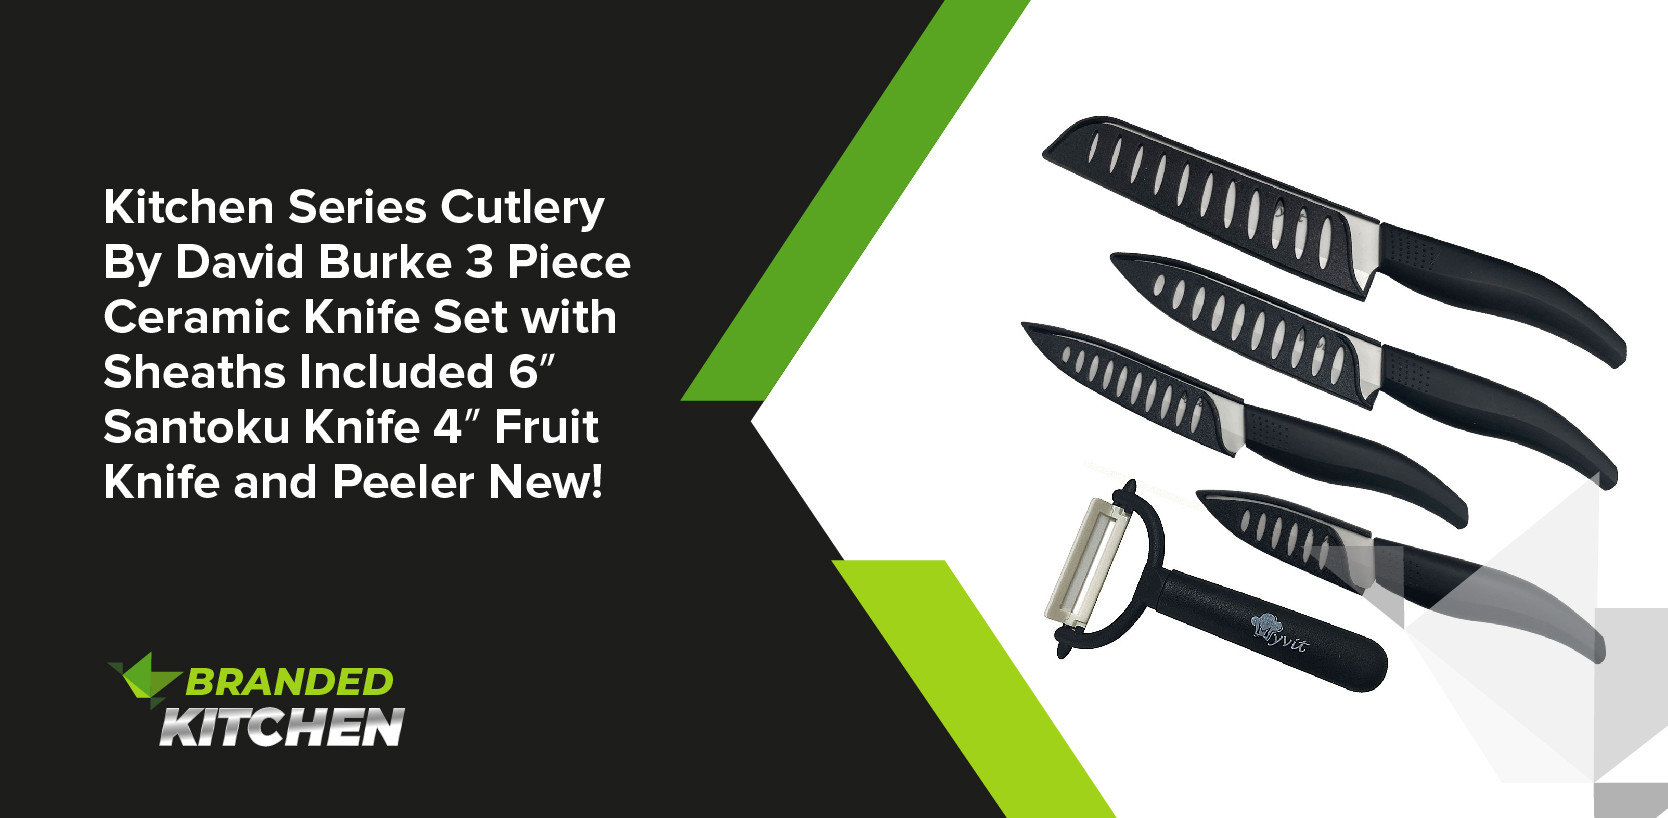 Kitchen Series Cutlery By David Burke 3 Piece Ceramic Knife Set with Sheaths Included 6″ Santoku Knife 4″ Fruit Knife and Peeler New!